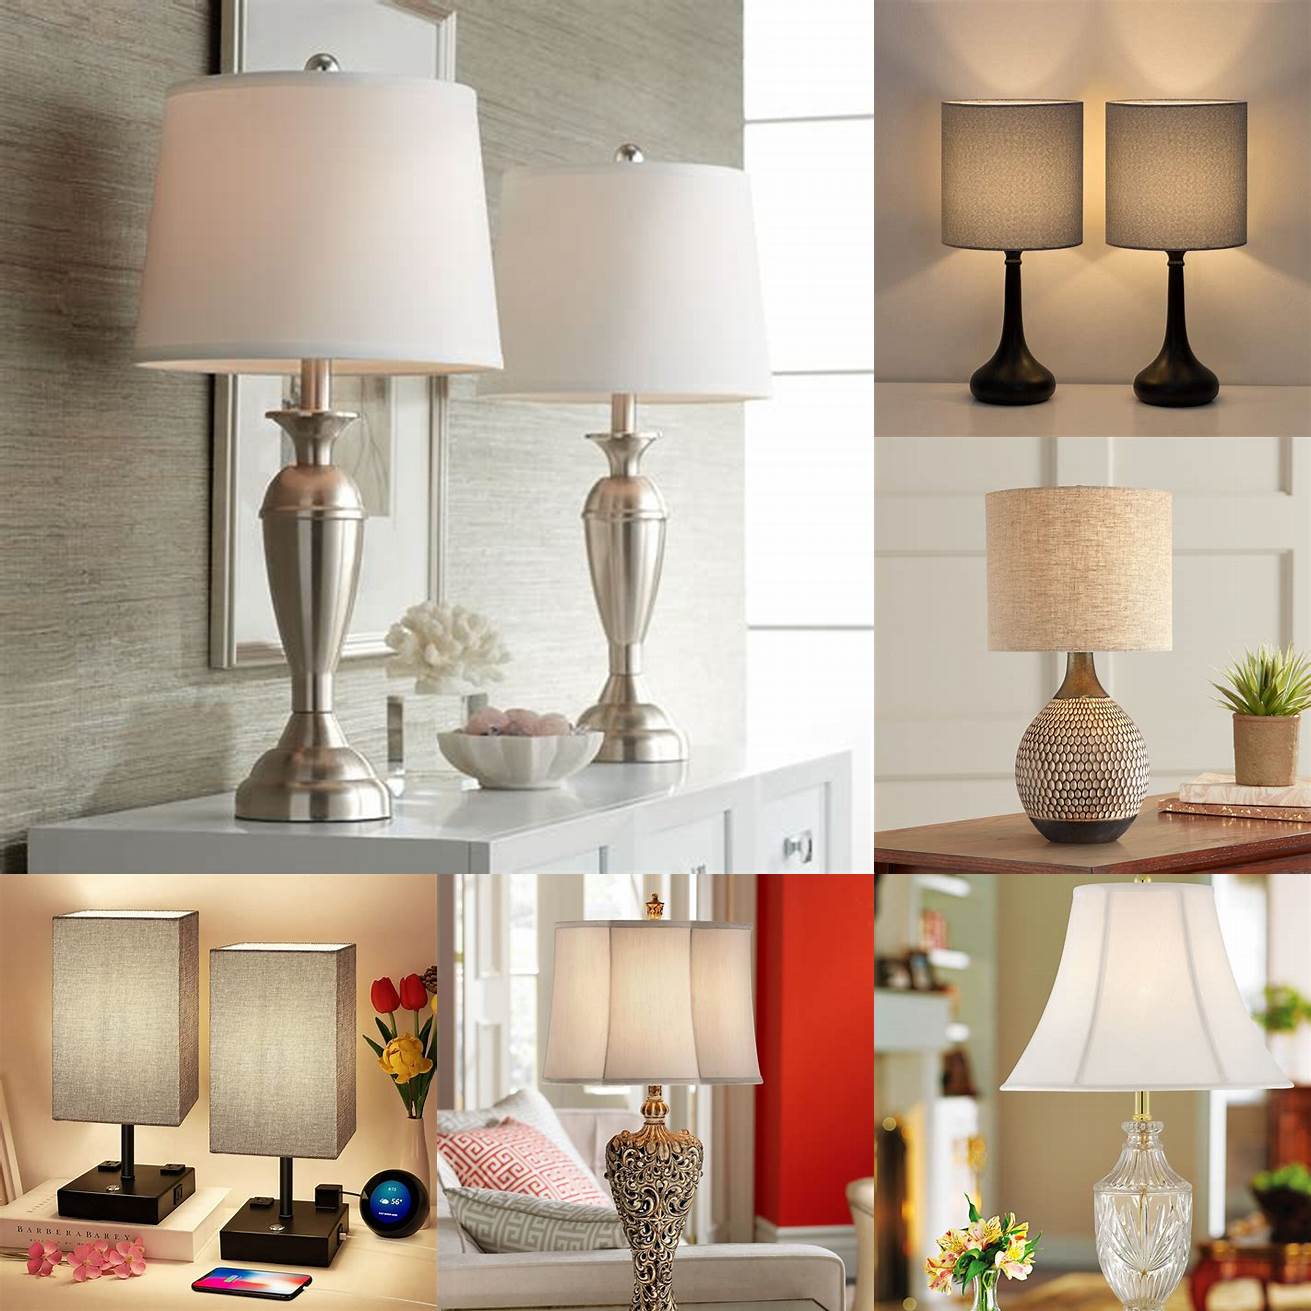 Table lamps on nightstands